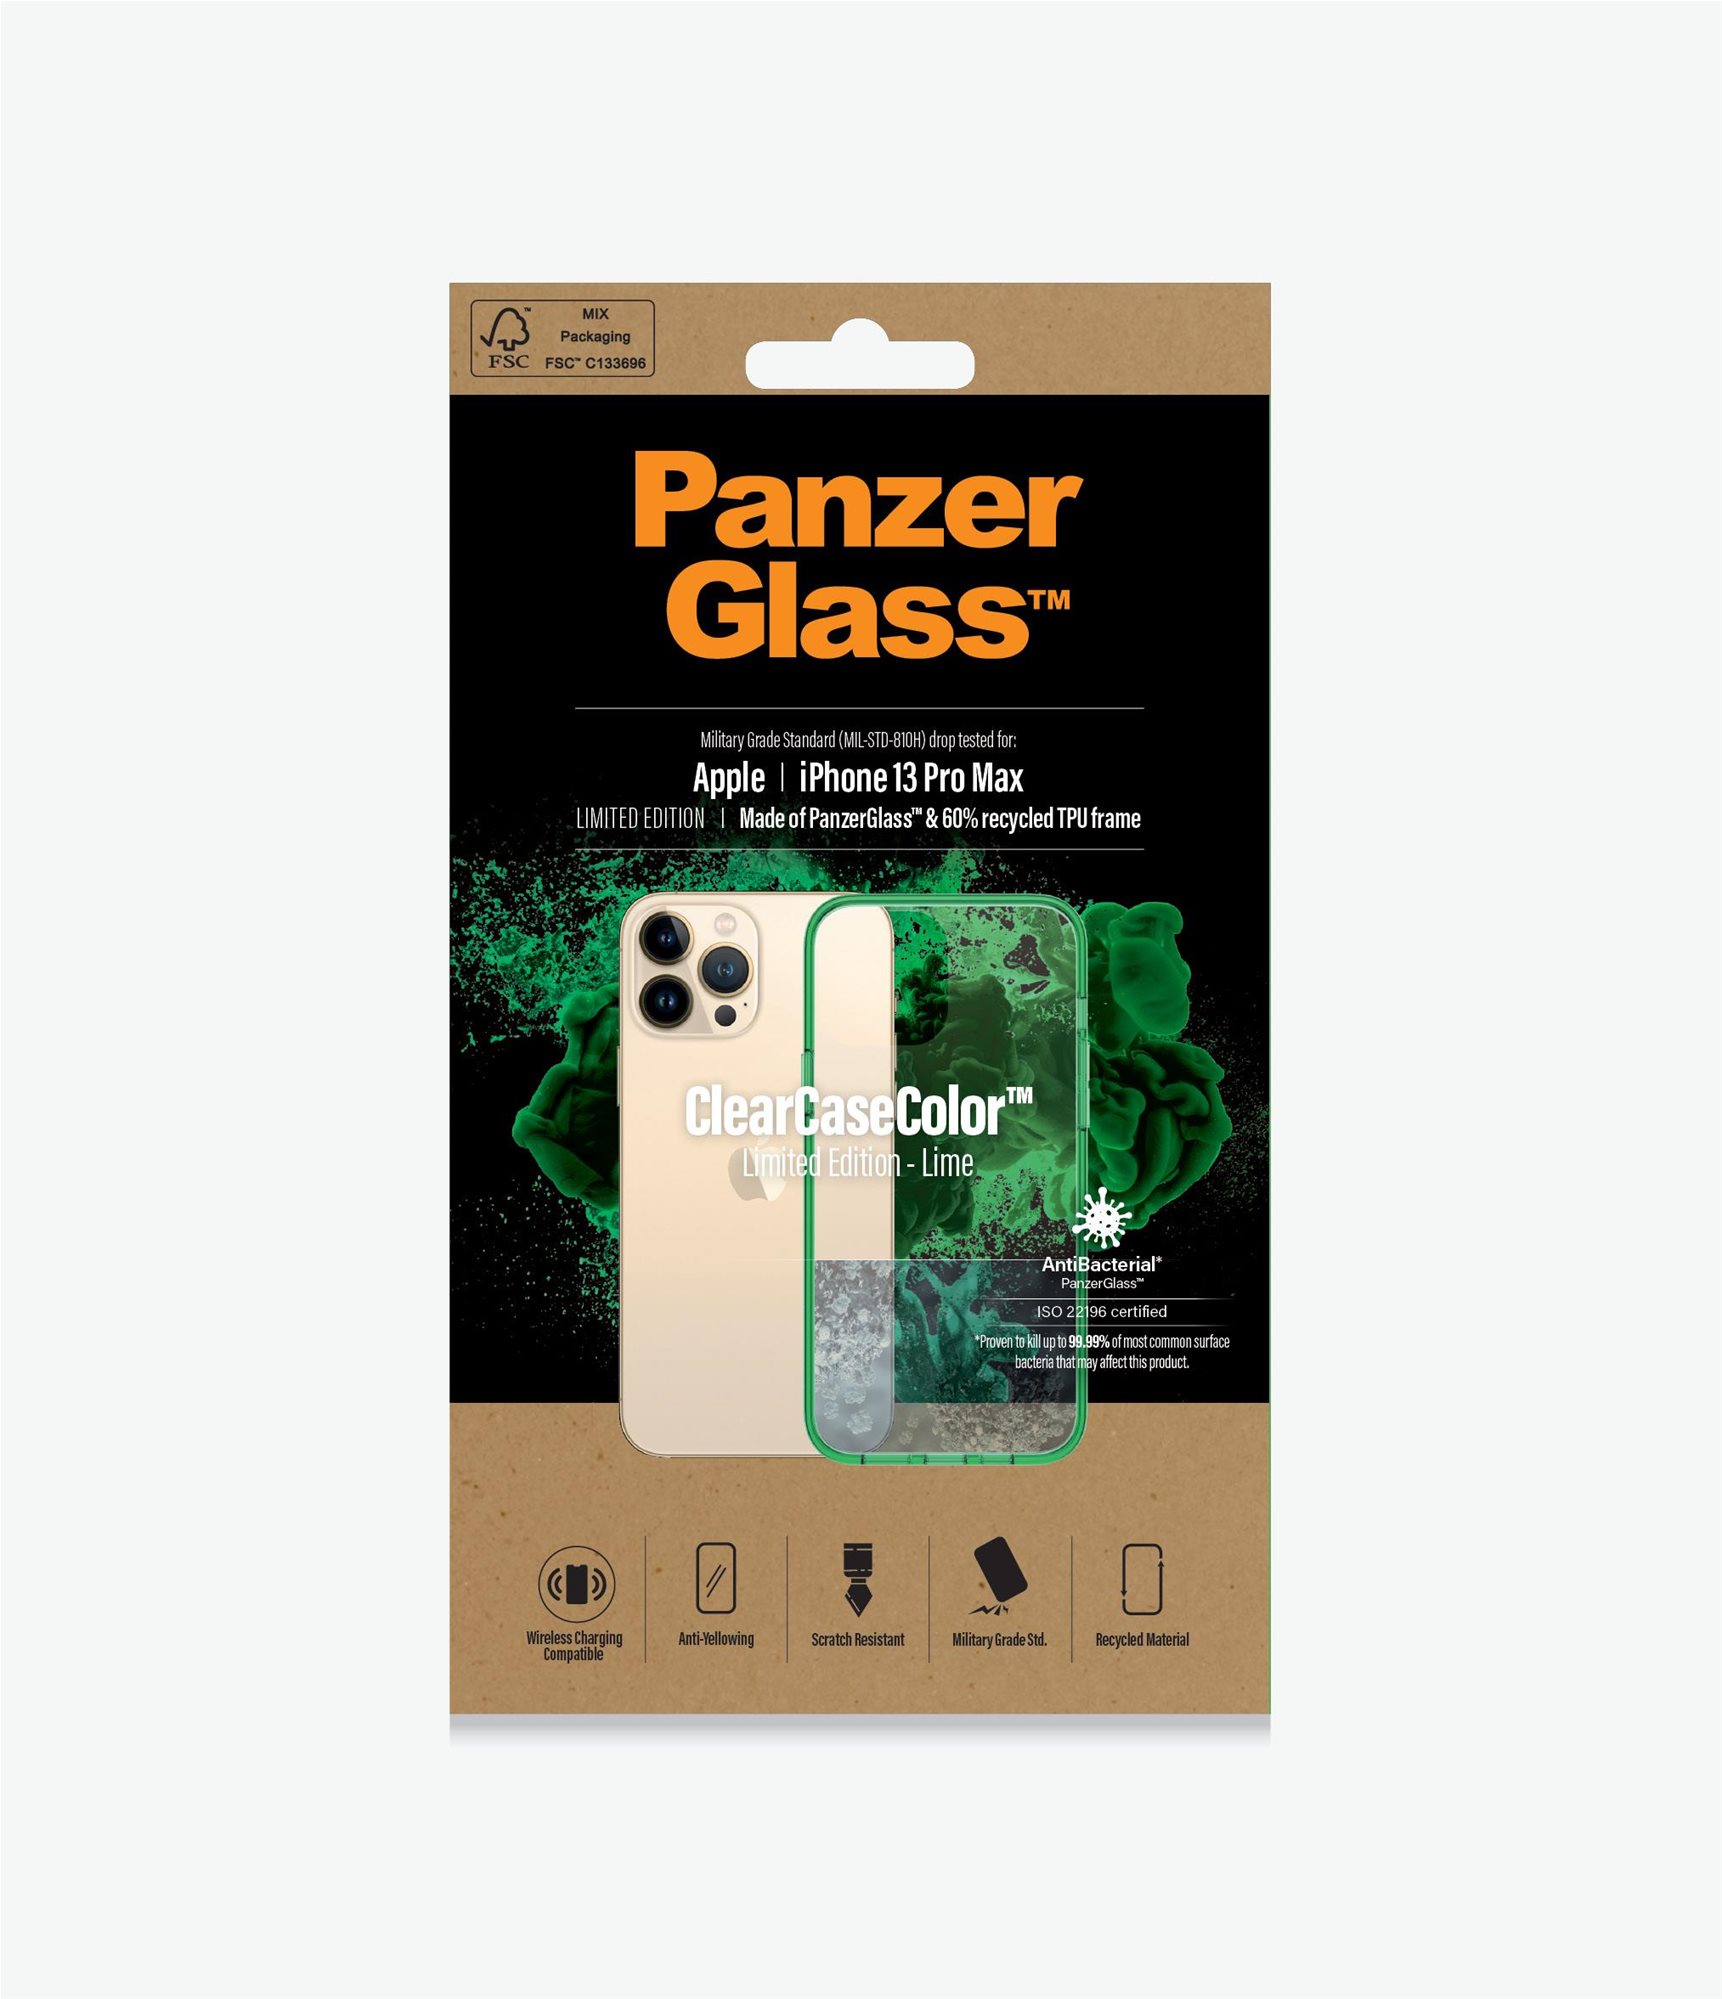 PanzerGlass ClearCaseColor Apple iPhone 13 Pro Max (zöld - Lime)